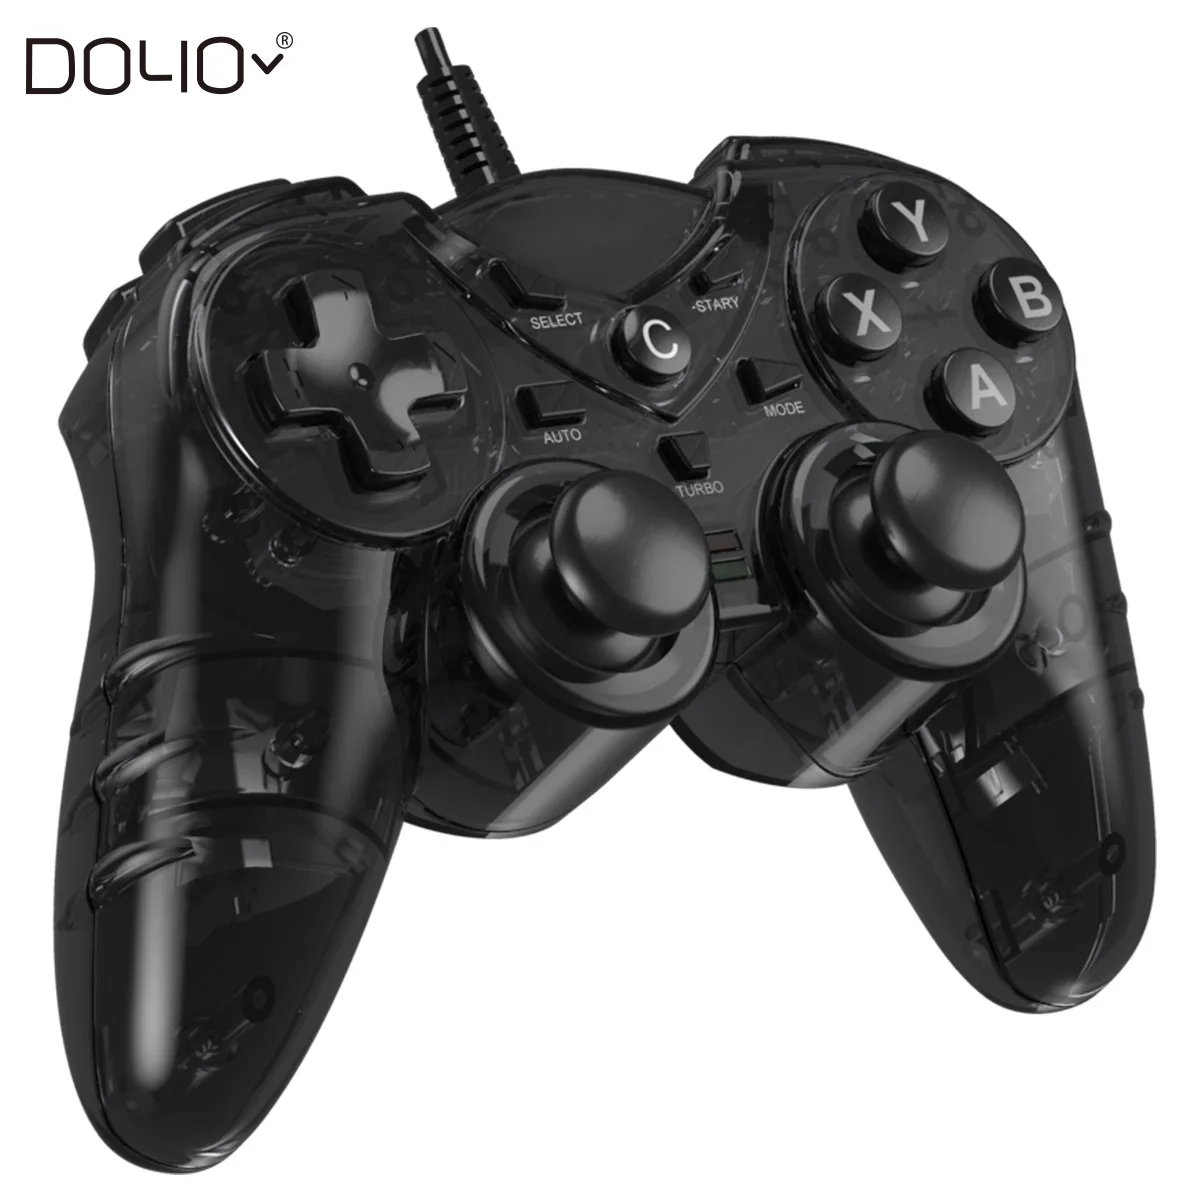 Factory Price Dual Vibration Turbo Trigger Wired Usb Steam Gamepad Joystick Game Controller For Pc - Buy Wired Game For Pc,3d Analog Stick Joystick Play 4 Station Capp